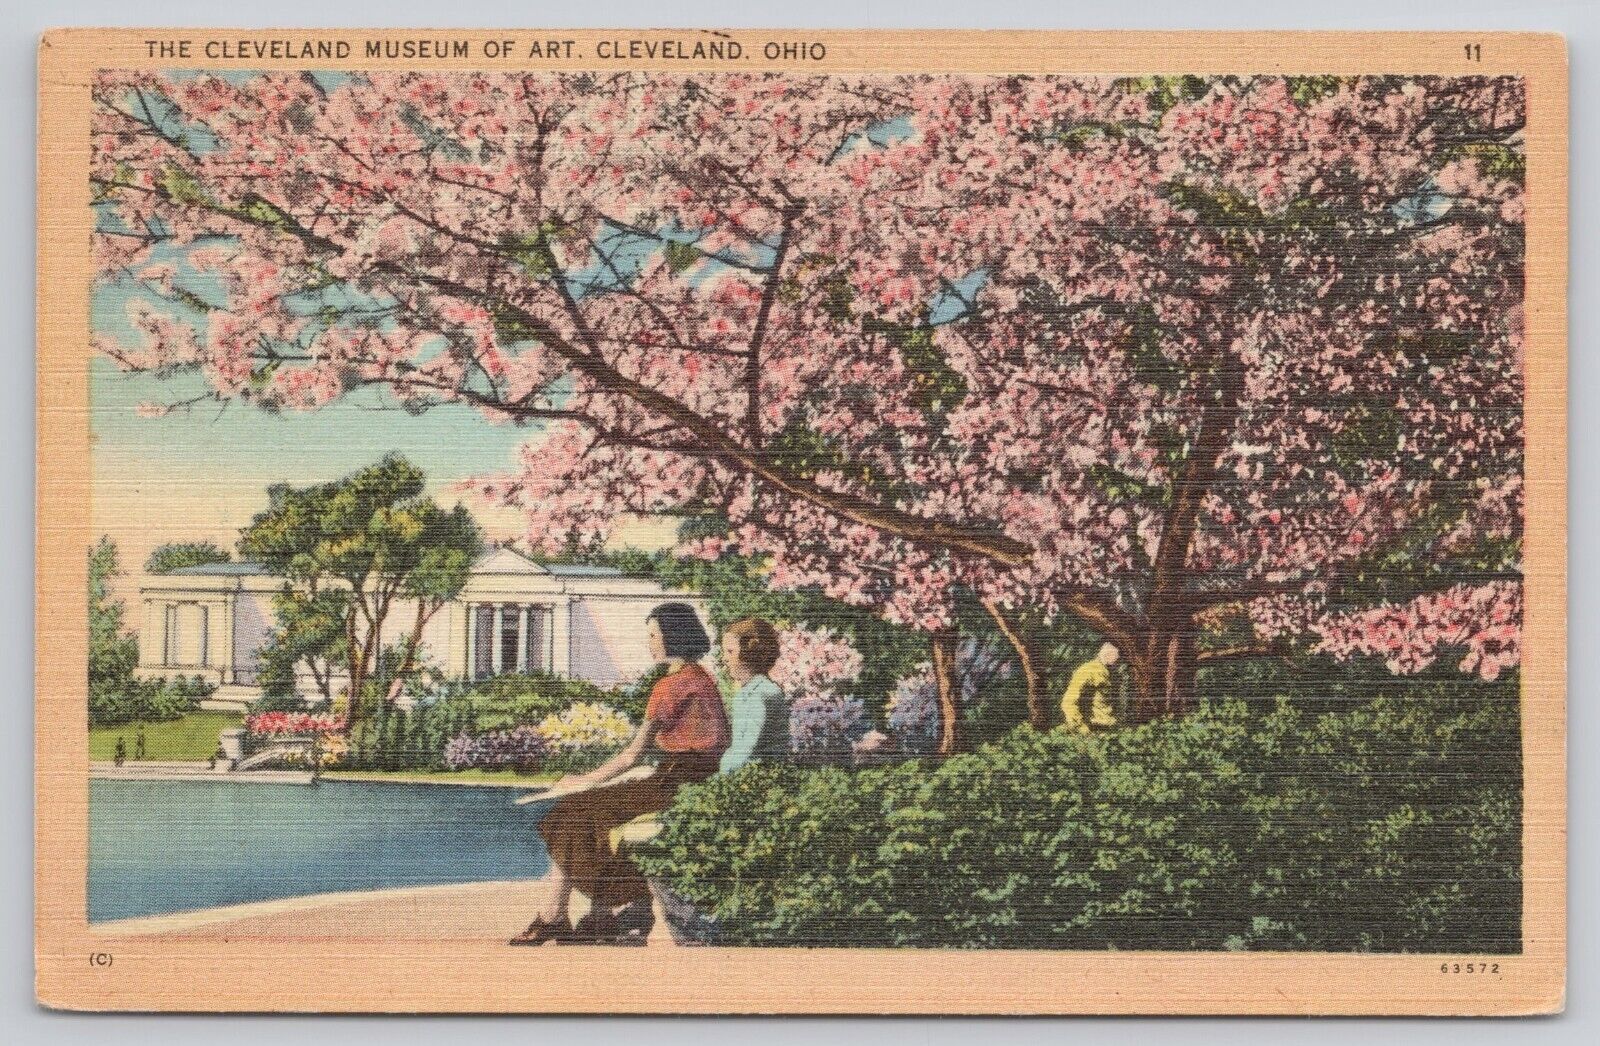 Postcard the Cleveland, Museum of Art, Cleveland, Ohio